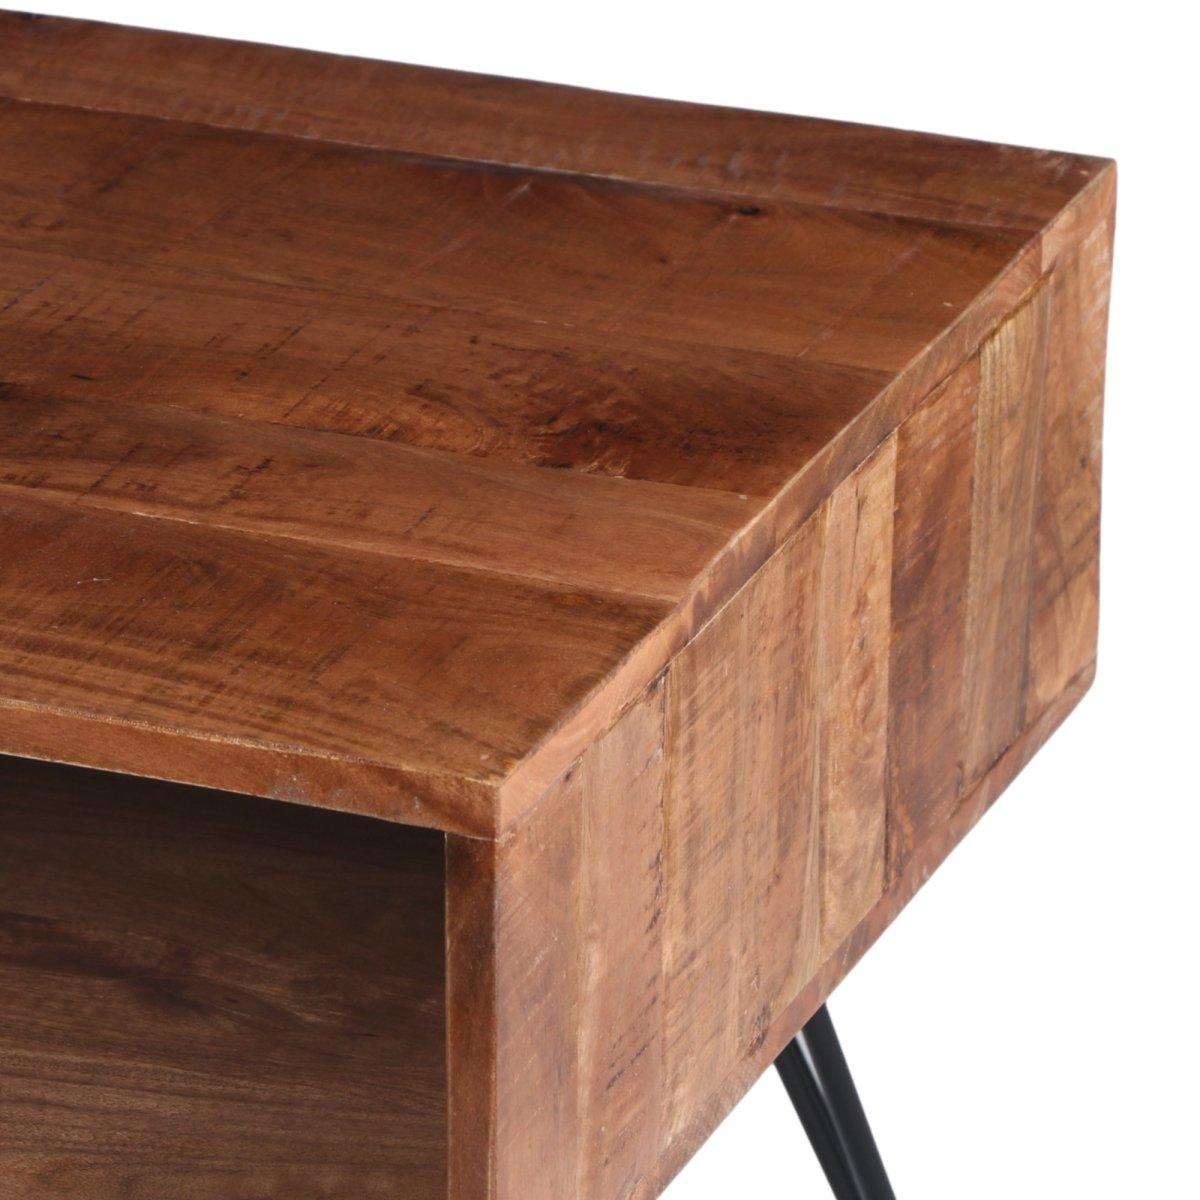 Open Mango Wood Coffee Table - Rustic Furniture Outlet